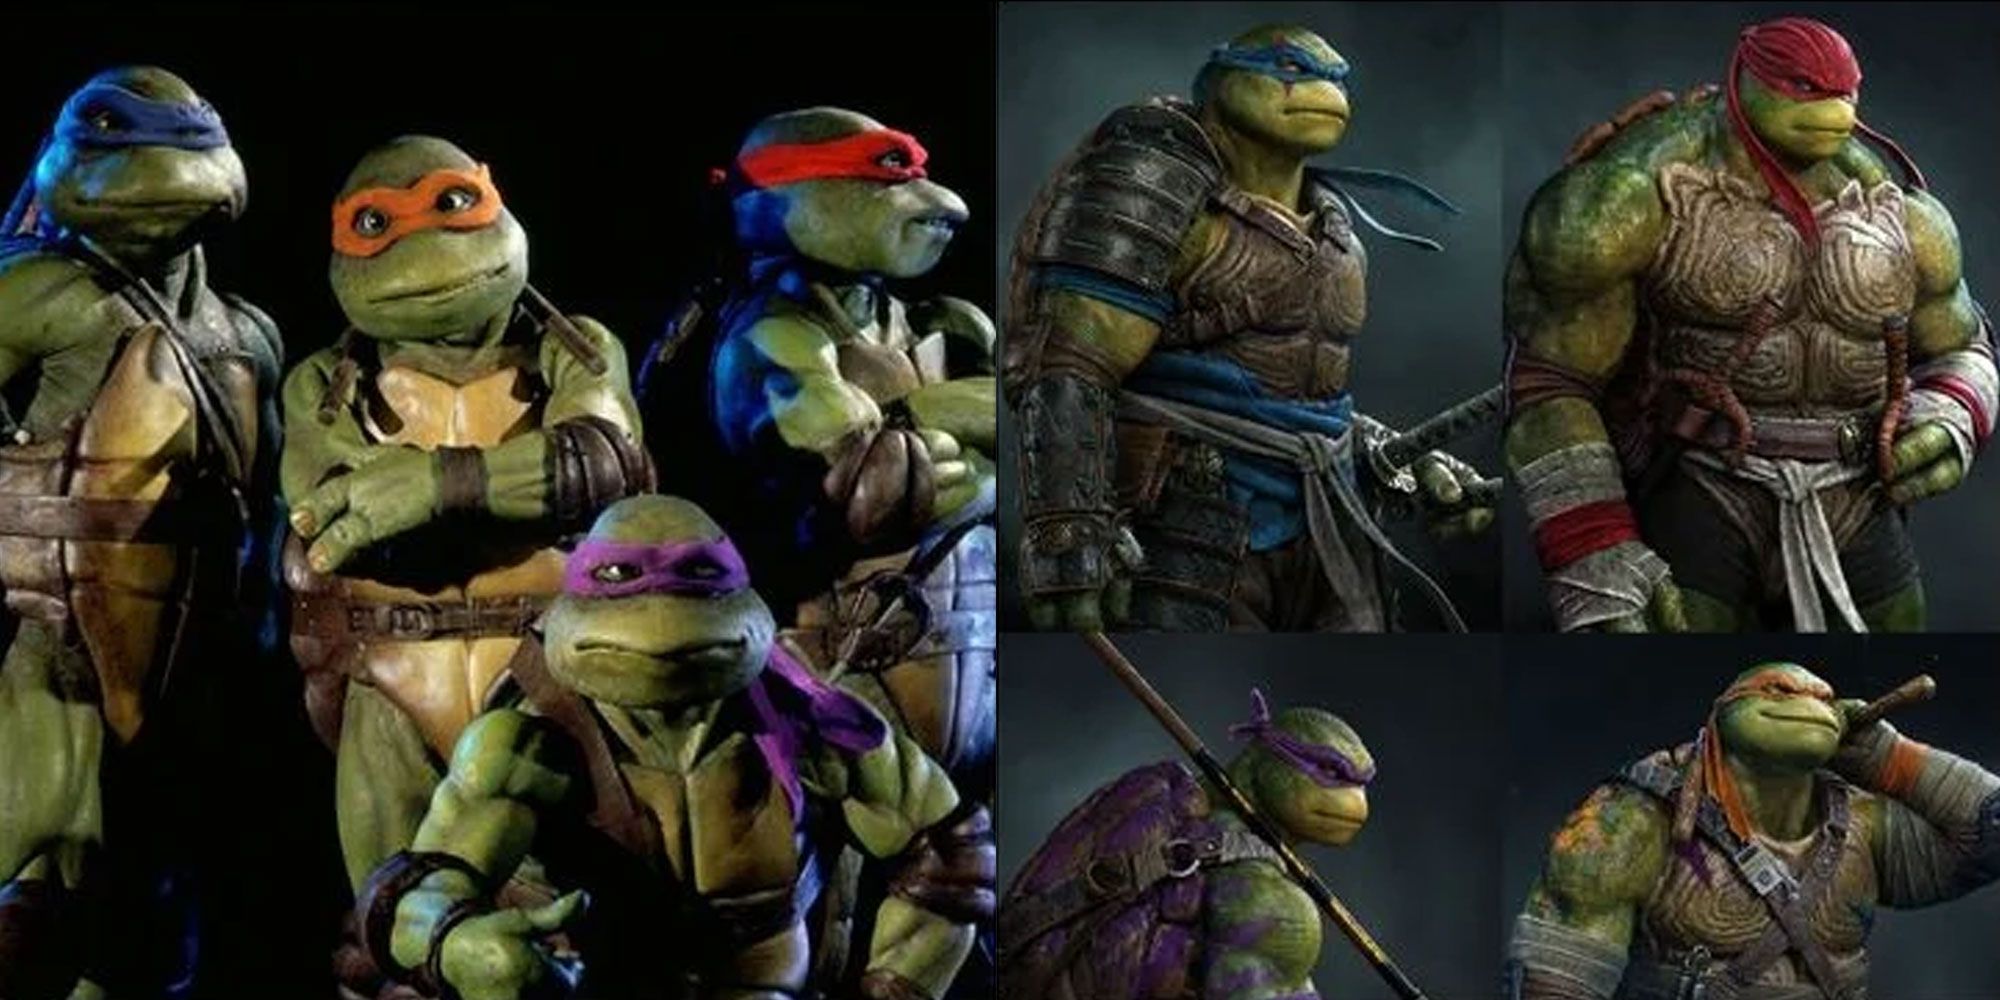 A split image compares the 90s live action Ninja Turtle design to the 2016 design